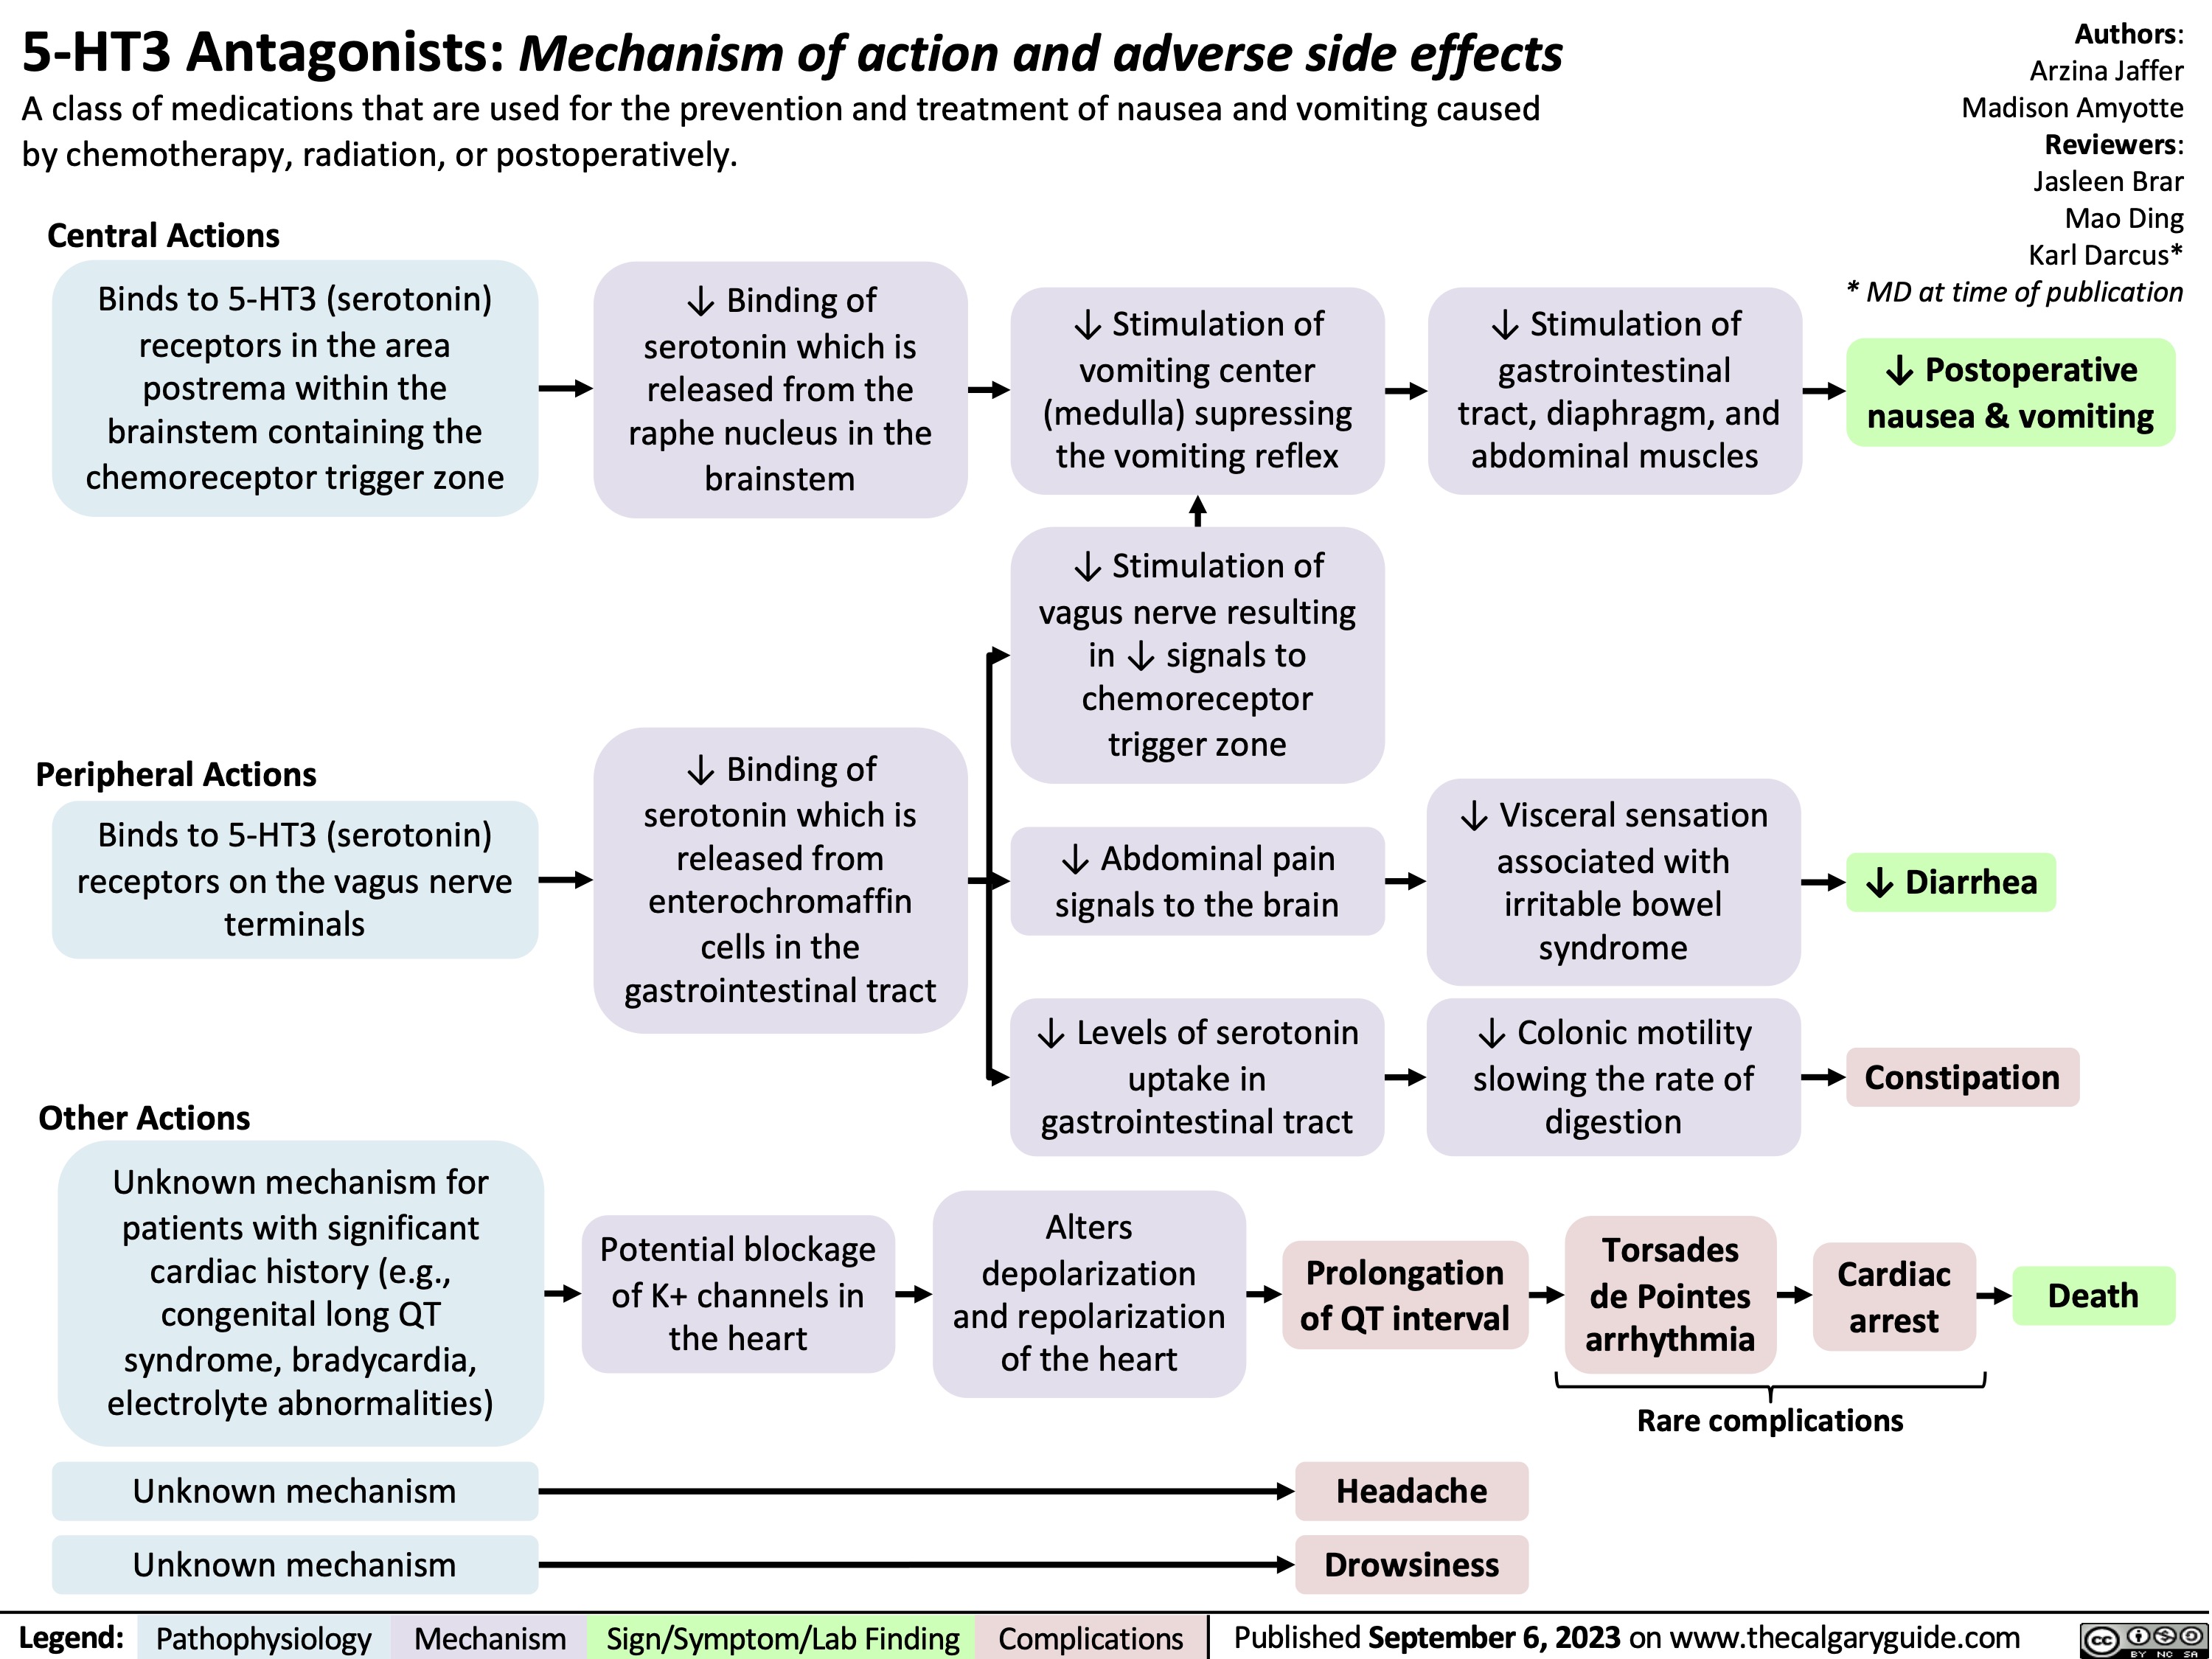 5-HT3 Antagonists: Mechanism of action and adverse side effects A class of medications that are used for the prevention and treatment of nausea and vomiting caused by chemotherapy, radiation, or postoperatively.
Authors: Arzina Jaffer Madison Amyotte Reviewers: Jasleen Brar Mao Ding Karl Darcus* * MD at time of publication
↓ Postoperative nausea & vomiting
Central Actions
Binds to 5-HT3 (serotonin) receptors in the area postrema within the brainstem containing the chemoreceptor trigger zone
↓ Binding of serotonin which is released from the raphe nucleus in the brainstem
↓ Stimulation of vomiting center
(medulla) supressing the vomiting reflex
↓ Stimulation of vagus nerve resulting in ↓ signals to chemoreceptor trigger zone
↓ Abdominal pain signals to the brain
↓ Levels of serotonin uptake in gastrointestinal tract
↓ Stimulation of gastrointestinal
tract, diaphragm, and abdominal muscles
        Peripheral Actions
Binds to 5-HT3 (serotonin) receptors on the vagus nerve terminals
Other Actions
Unknown mechanism for patients with significant cardiac history (e.g., congenital long QT syndrome, bradycardia, electrolyte abnormalities)
Unknown mechanism Unknown mechanism
↓ Binding of serotonin which is released from enterochromaffin cells in the gastrointestinal tract
Potential blockage of K+ channels in the heart
↓ Visceral sensation associated with irritable bowel syndrome
↓ Colonic motility slowing the rate of digestion
↓ Diarrhea
Constipation
          Alters depolarization
and repolarization of the heart
Prolongation of QT interval
Headache Drowsiness
Torsades de Pointes arrhythmia
Cardiac arrest
Death
      Rare complications
      Legend:
 Pathophysiology
Mechanism
Sign/Symptom/Lab Finding
 Complications
Published September 6, 2023 on www.thecalgaryguide.com
    